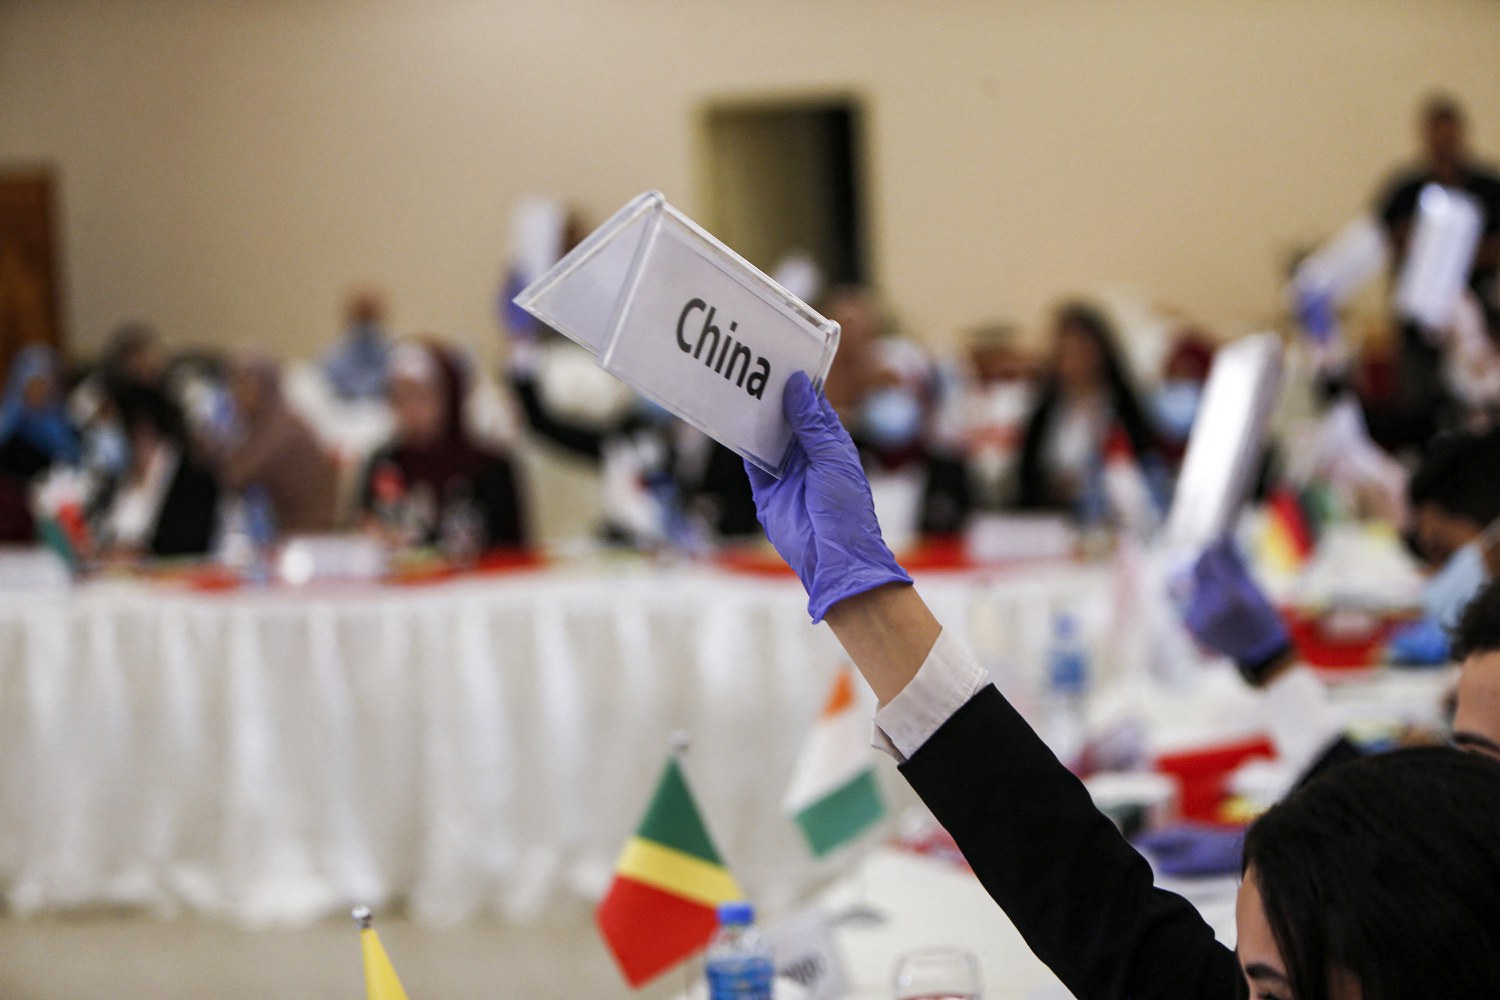 Guangdong officials ban Model United Nations over federalism debate — Radio Free Asia #chicomnews